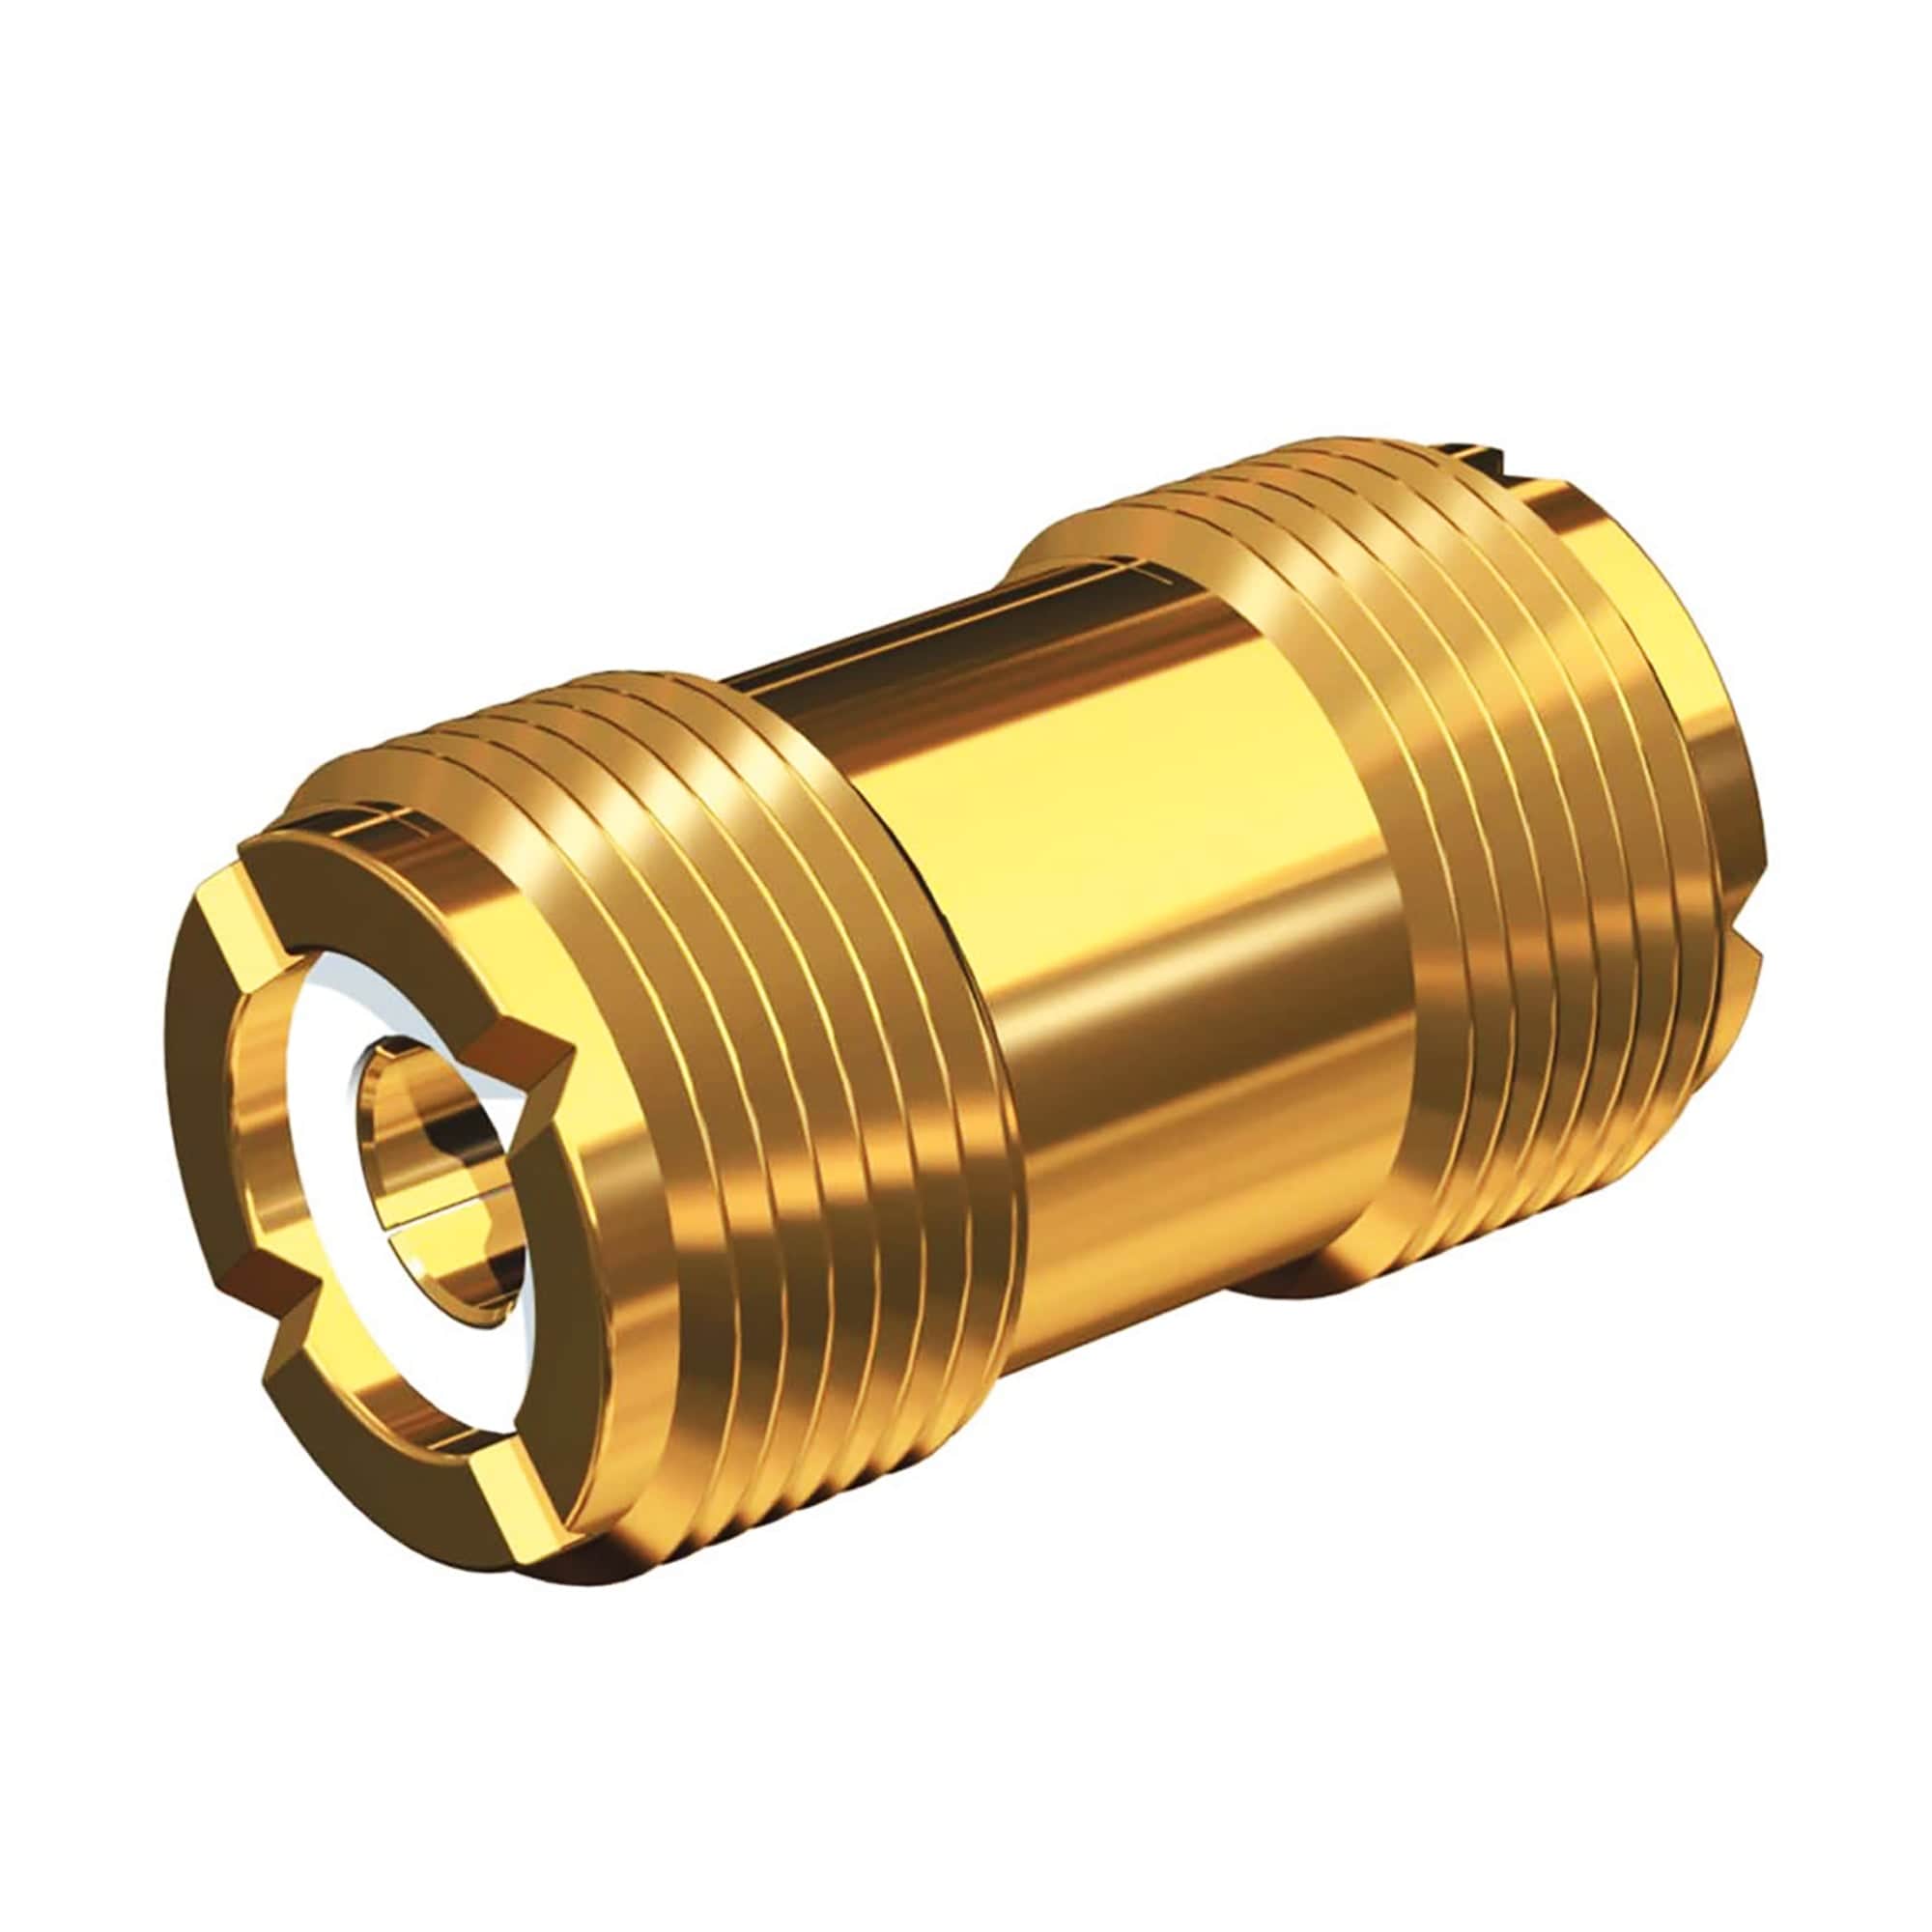 Shakespeare PL-258-G Gold-Plated Barrel Connector for PL-259 Ended Cables